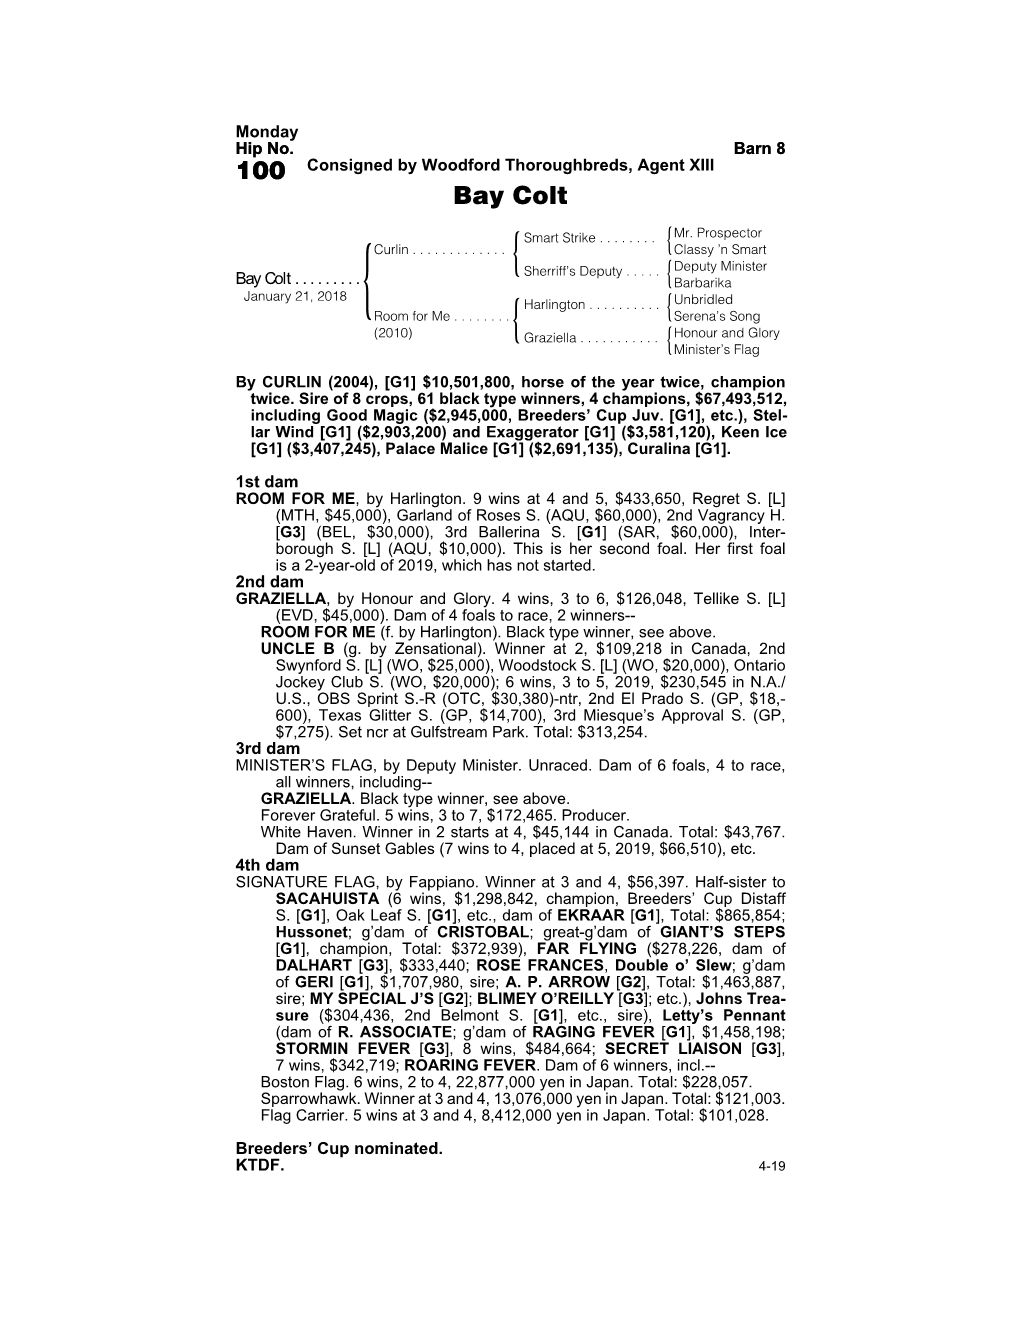 100 Consigned by Woodford Thoroughbreds, Agent XIII Bay Colt